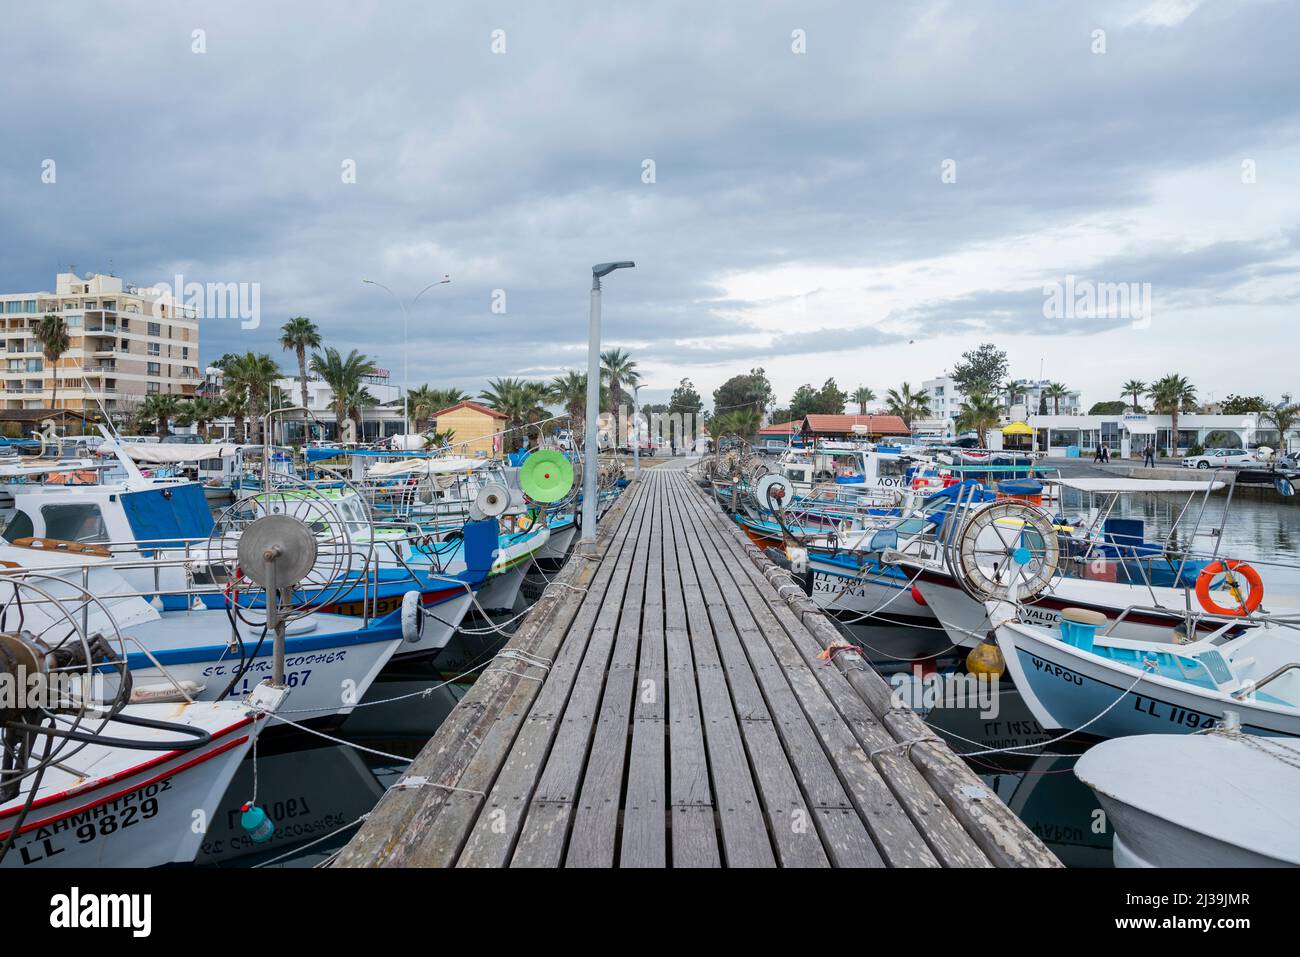 August 11, 2020 .Cyprus Larnaka .Promenade with pubes in the city for fishermen Stock Photo